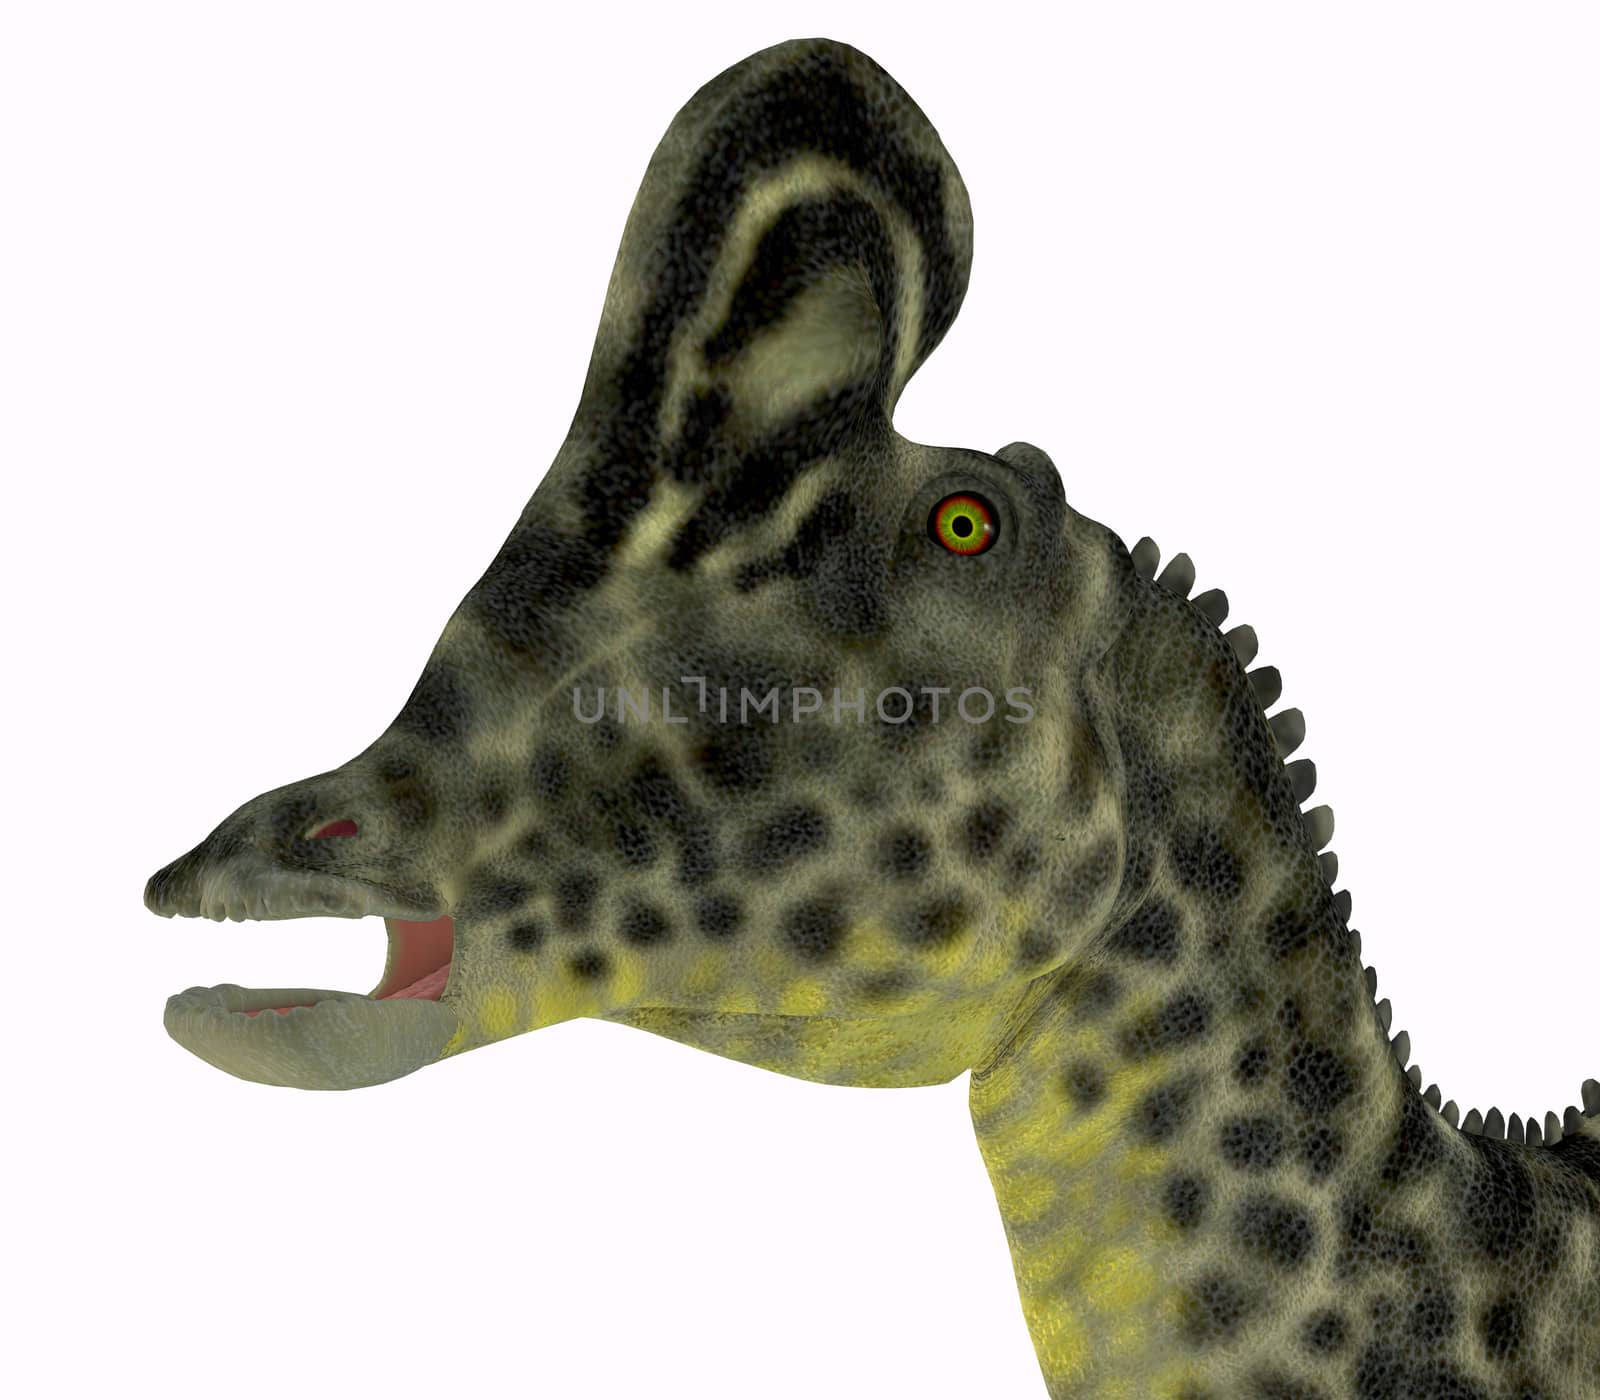 Velafrons was a herbivorous Hadrosaur dinosaur that lived in Mexico during the Cretaceous Period.